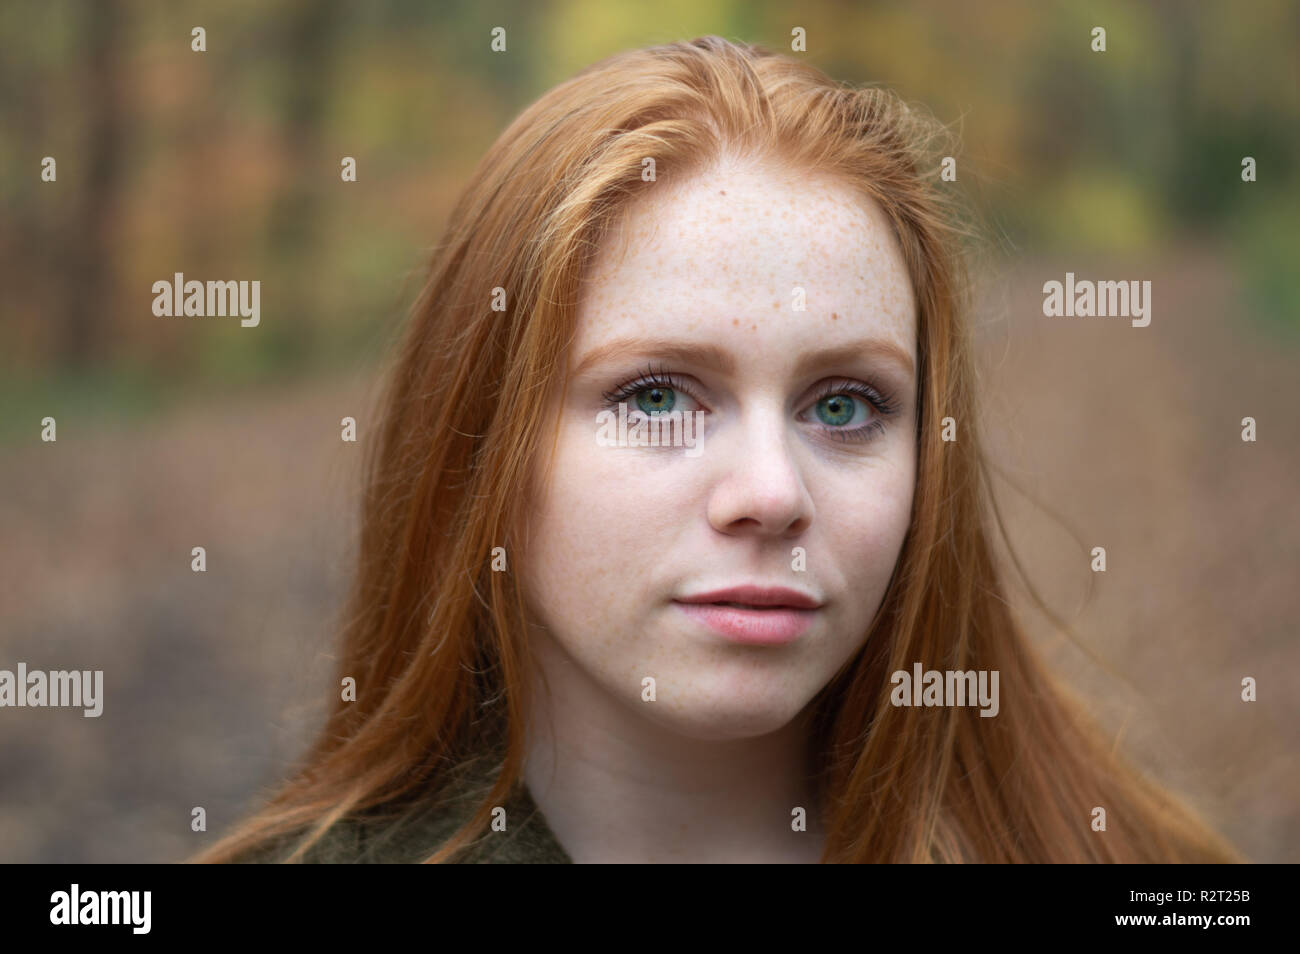 A Portrait of a red haired girl in a park in autumn Stock Photo